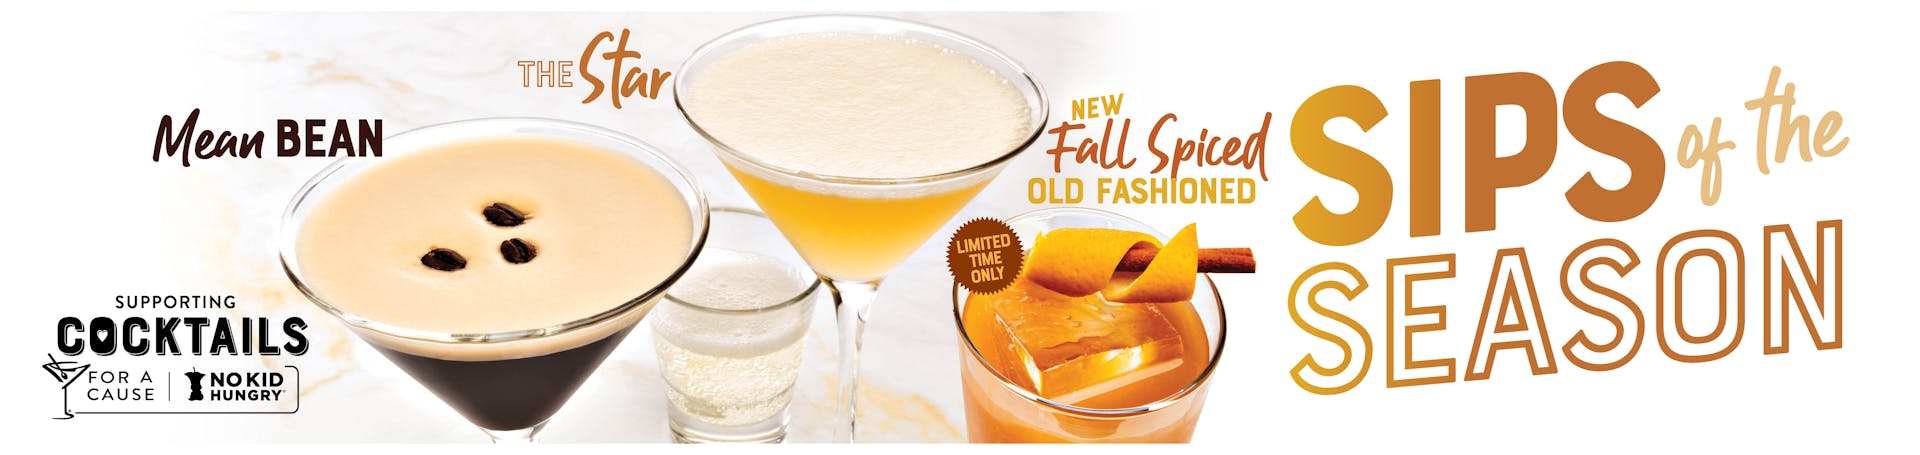 Image of 3 Cocktails. The Mean Bean, The Star supporting Cocktails for a Cause and No Kid Hungry. Also, for a limited time only, the Fall Old Fashioned. Sips of the Season.